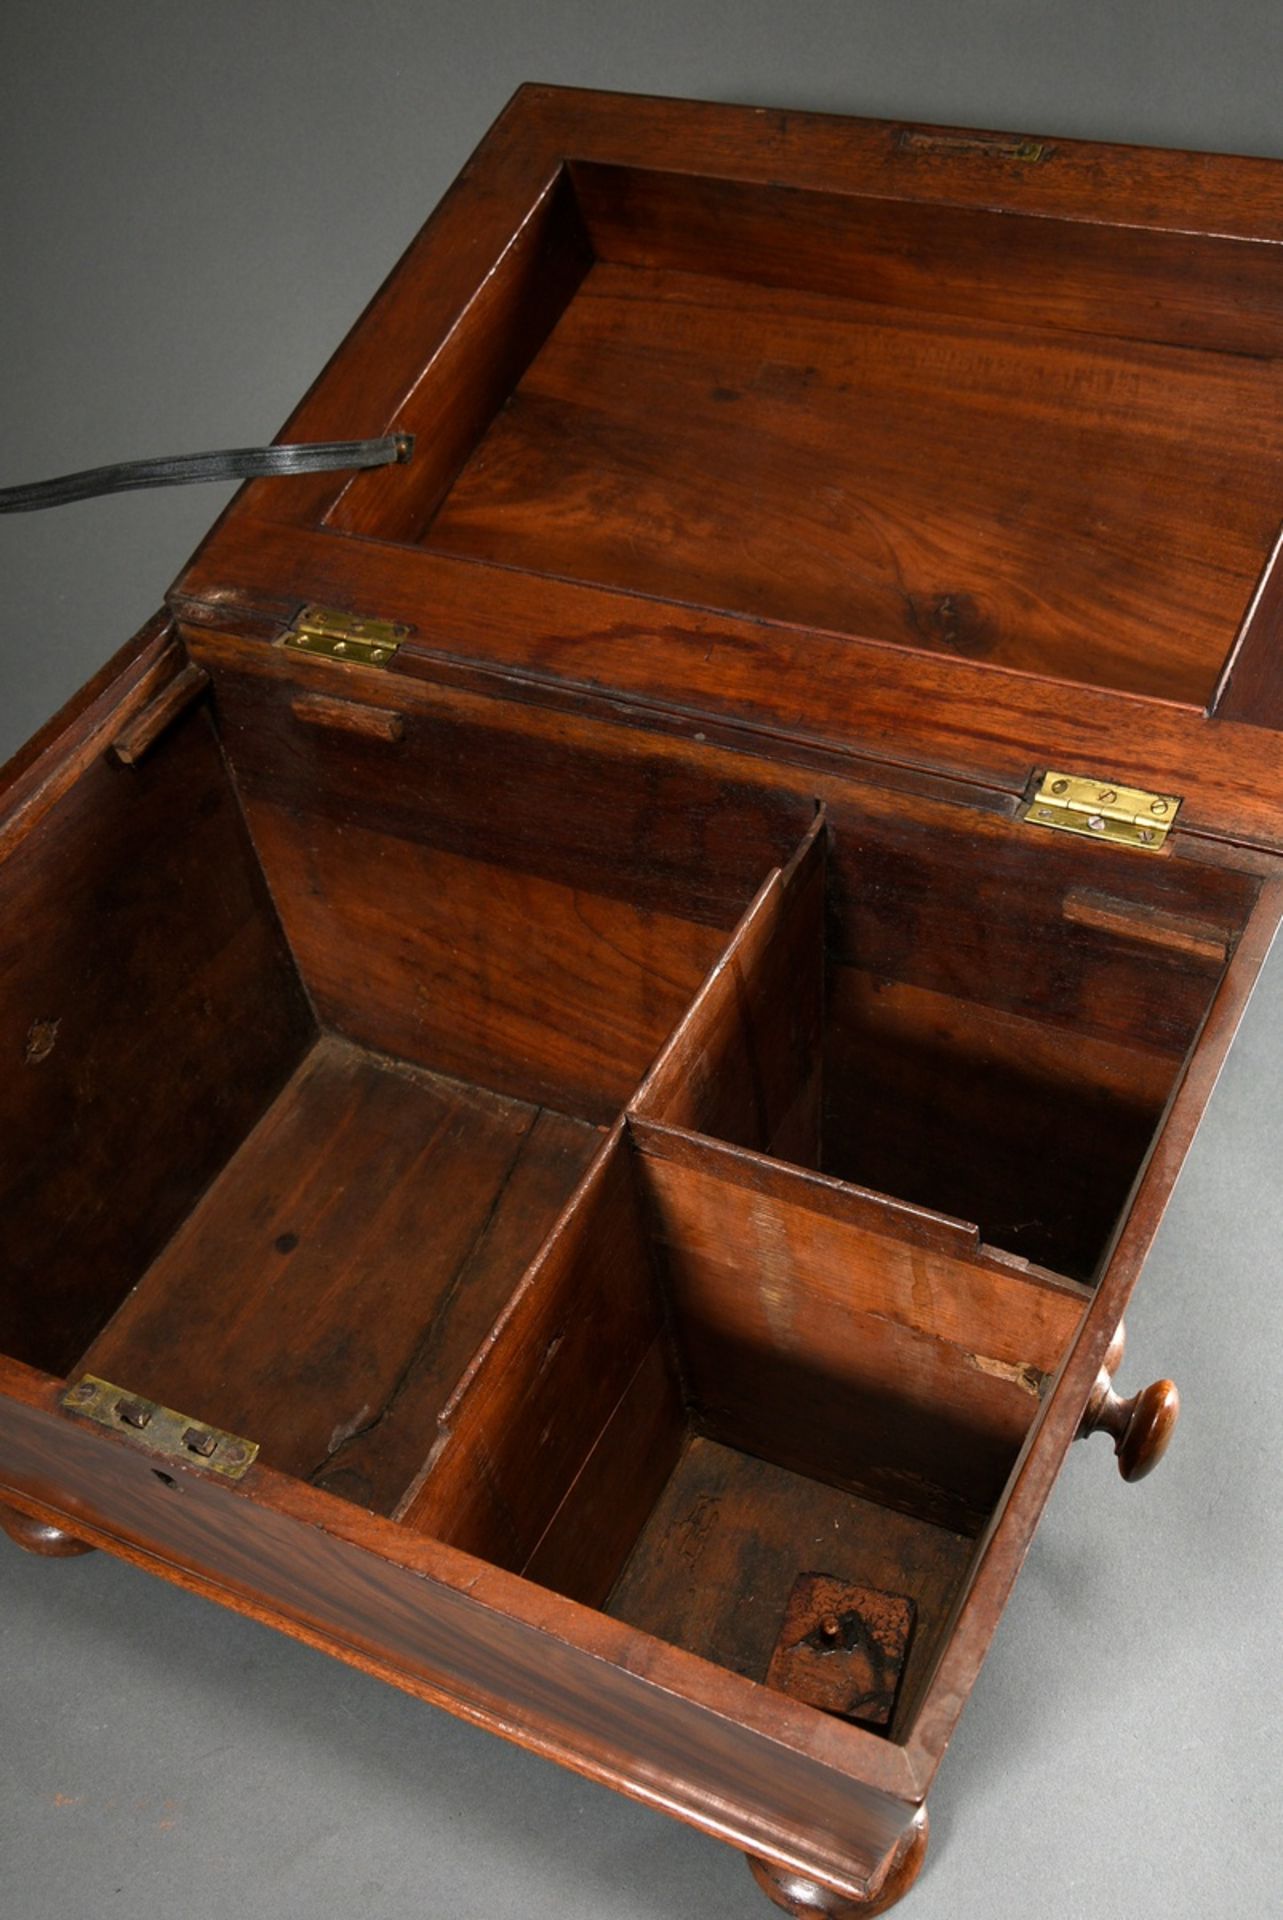 Large mahogany box in the shape of a sarcophagus with carrying knobs on the sides, compartmentalisa - Image 3 of 3